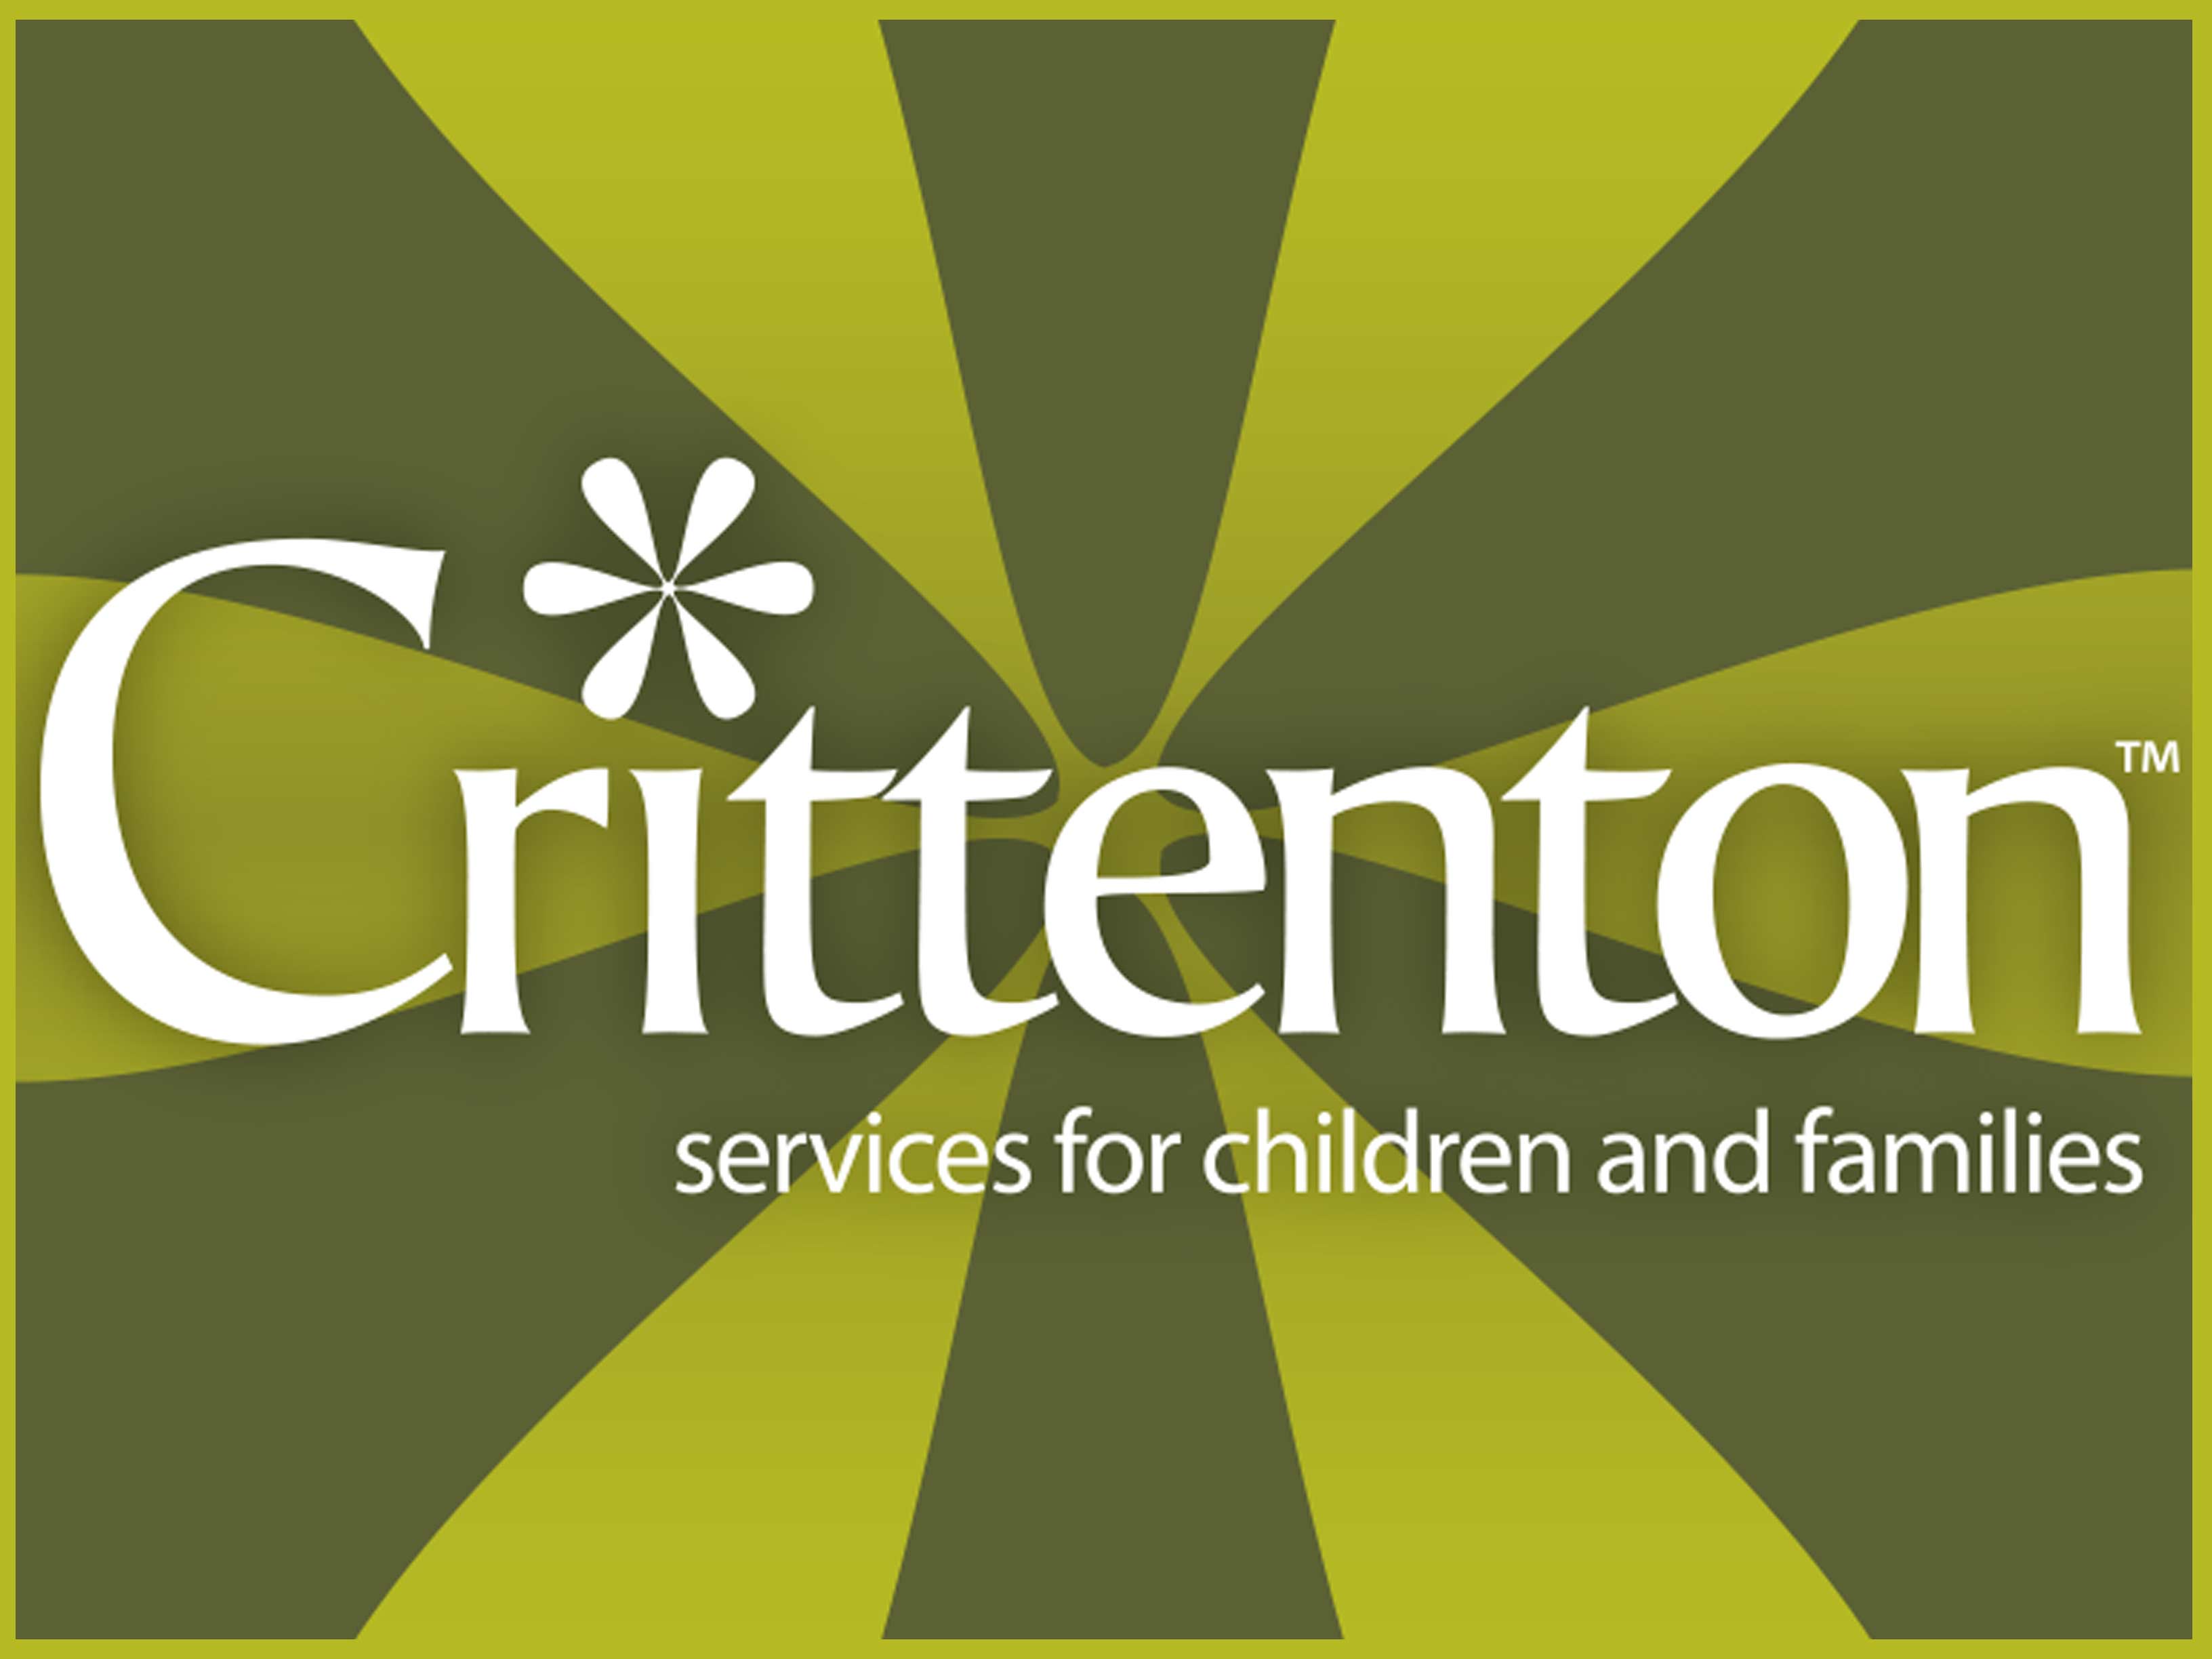 Crittenton | Services for Children and Families